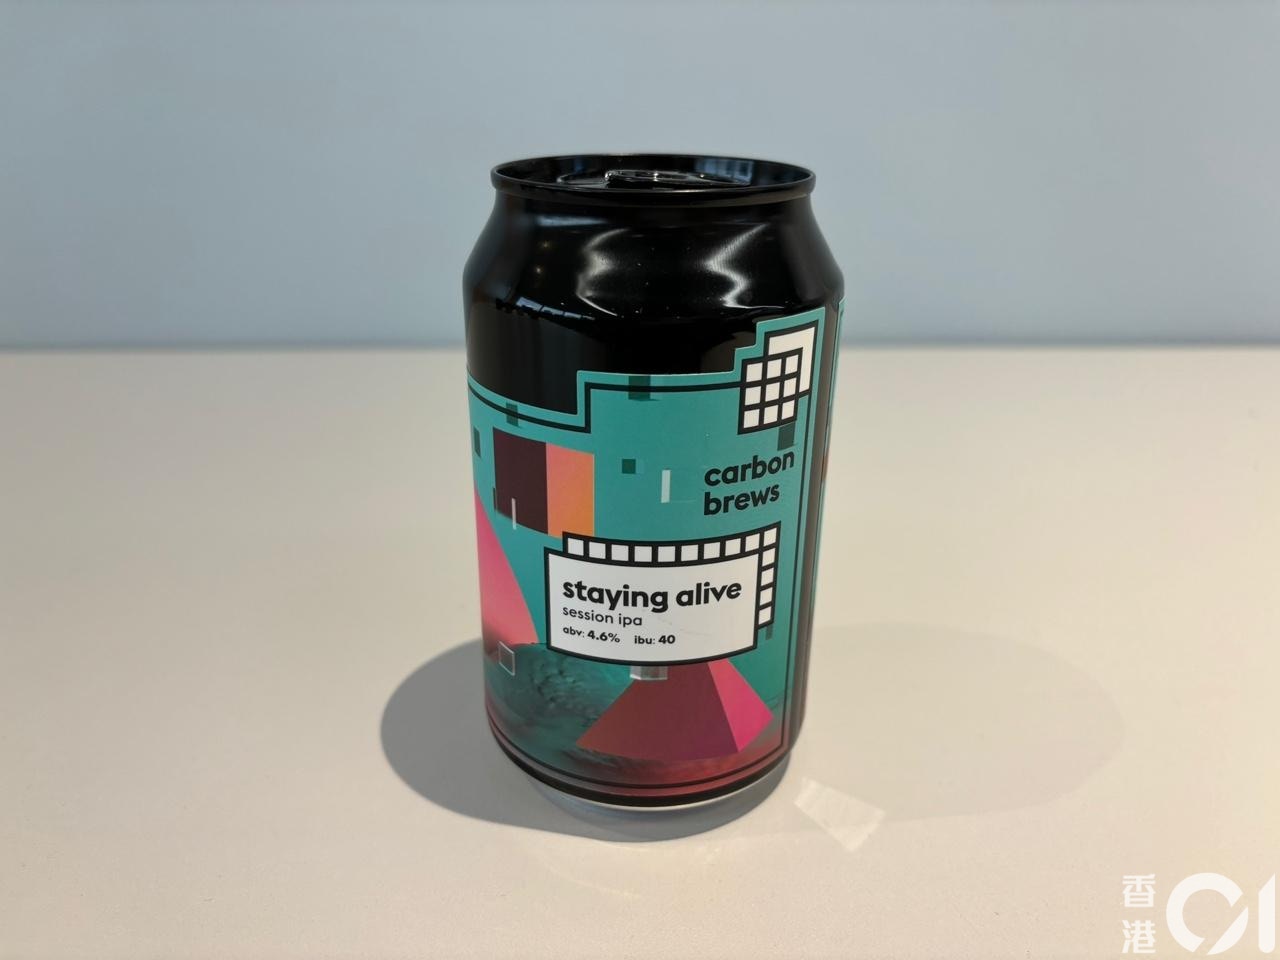 Carbon Brews的Staying Alive Session IPA，每罐$35，评分为5分。（梁祖儿摄）